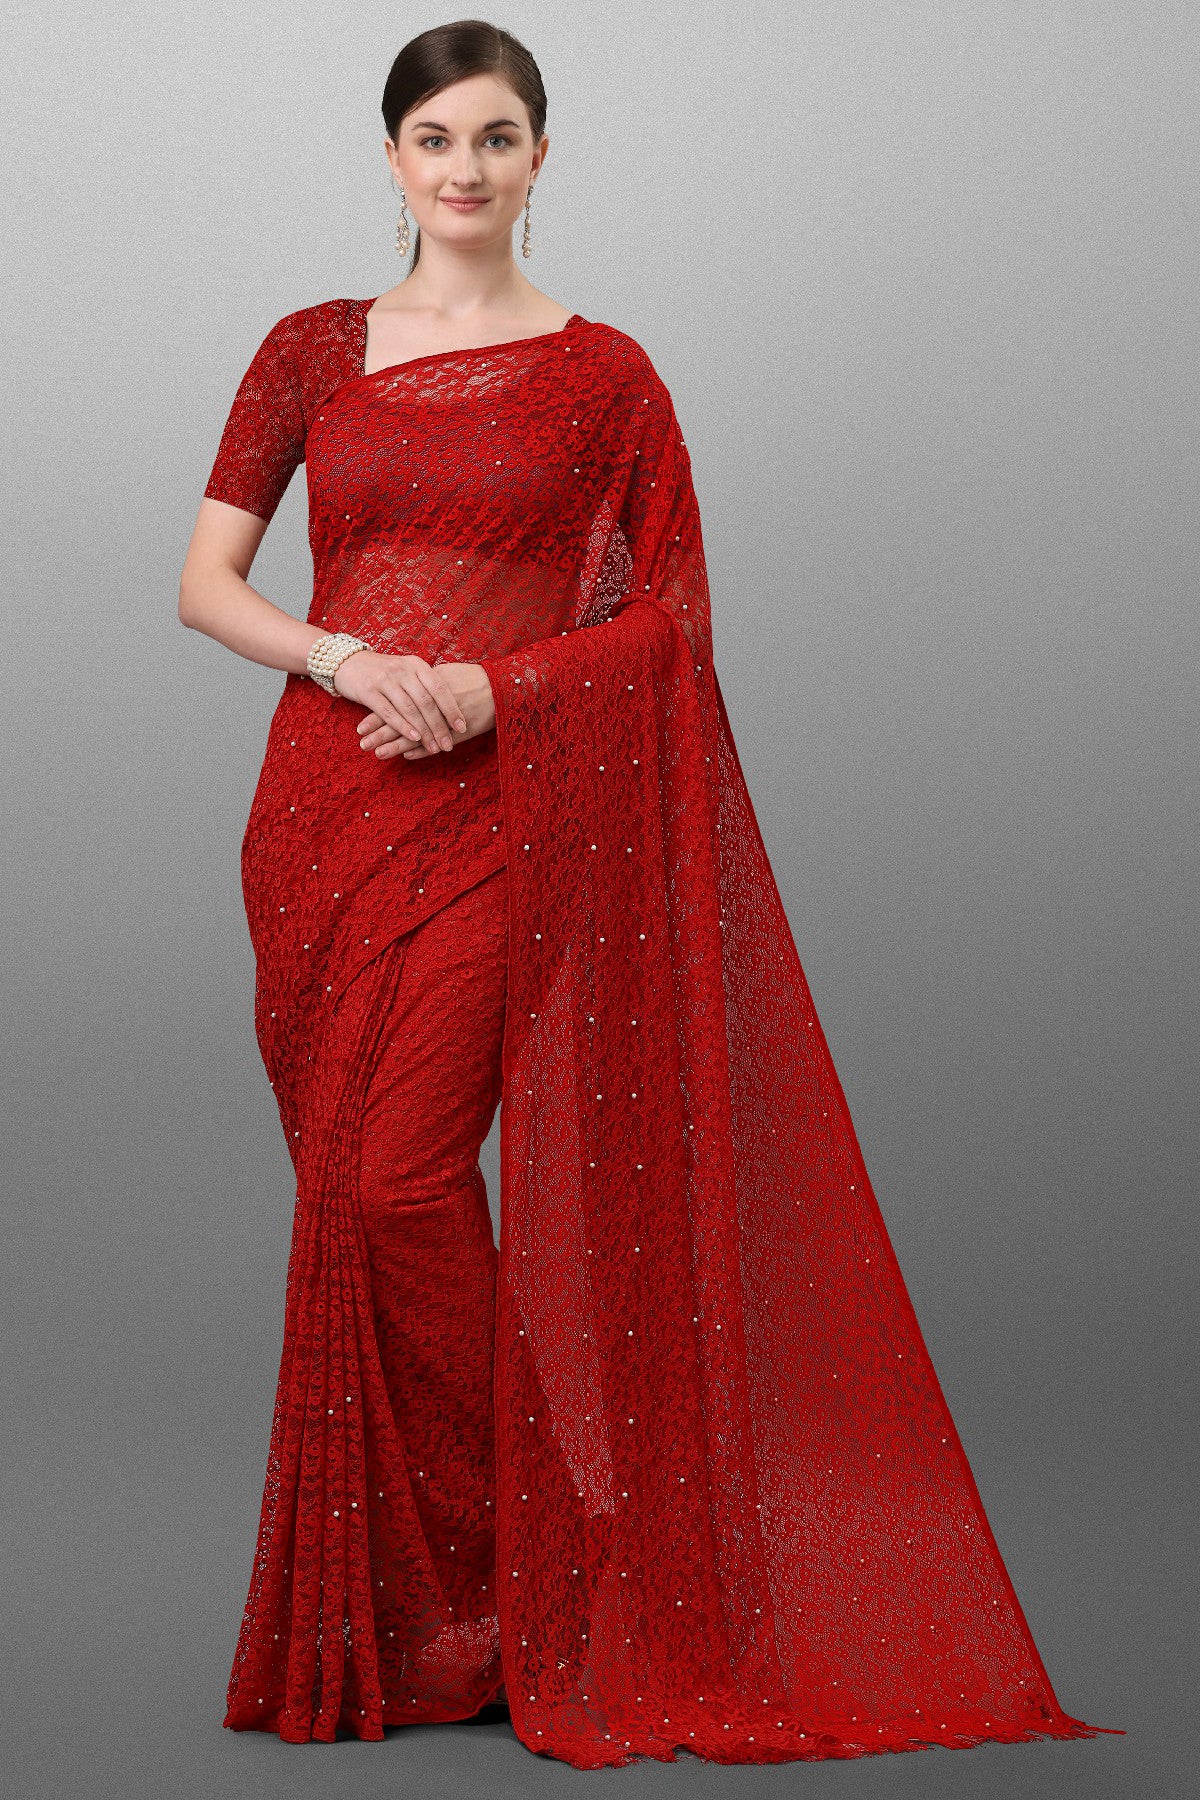 Classy Red Fancy Saree With Made From Viscose Yarn